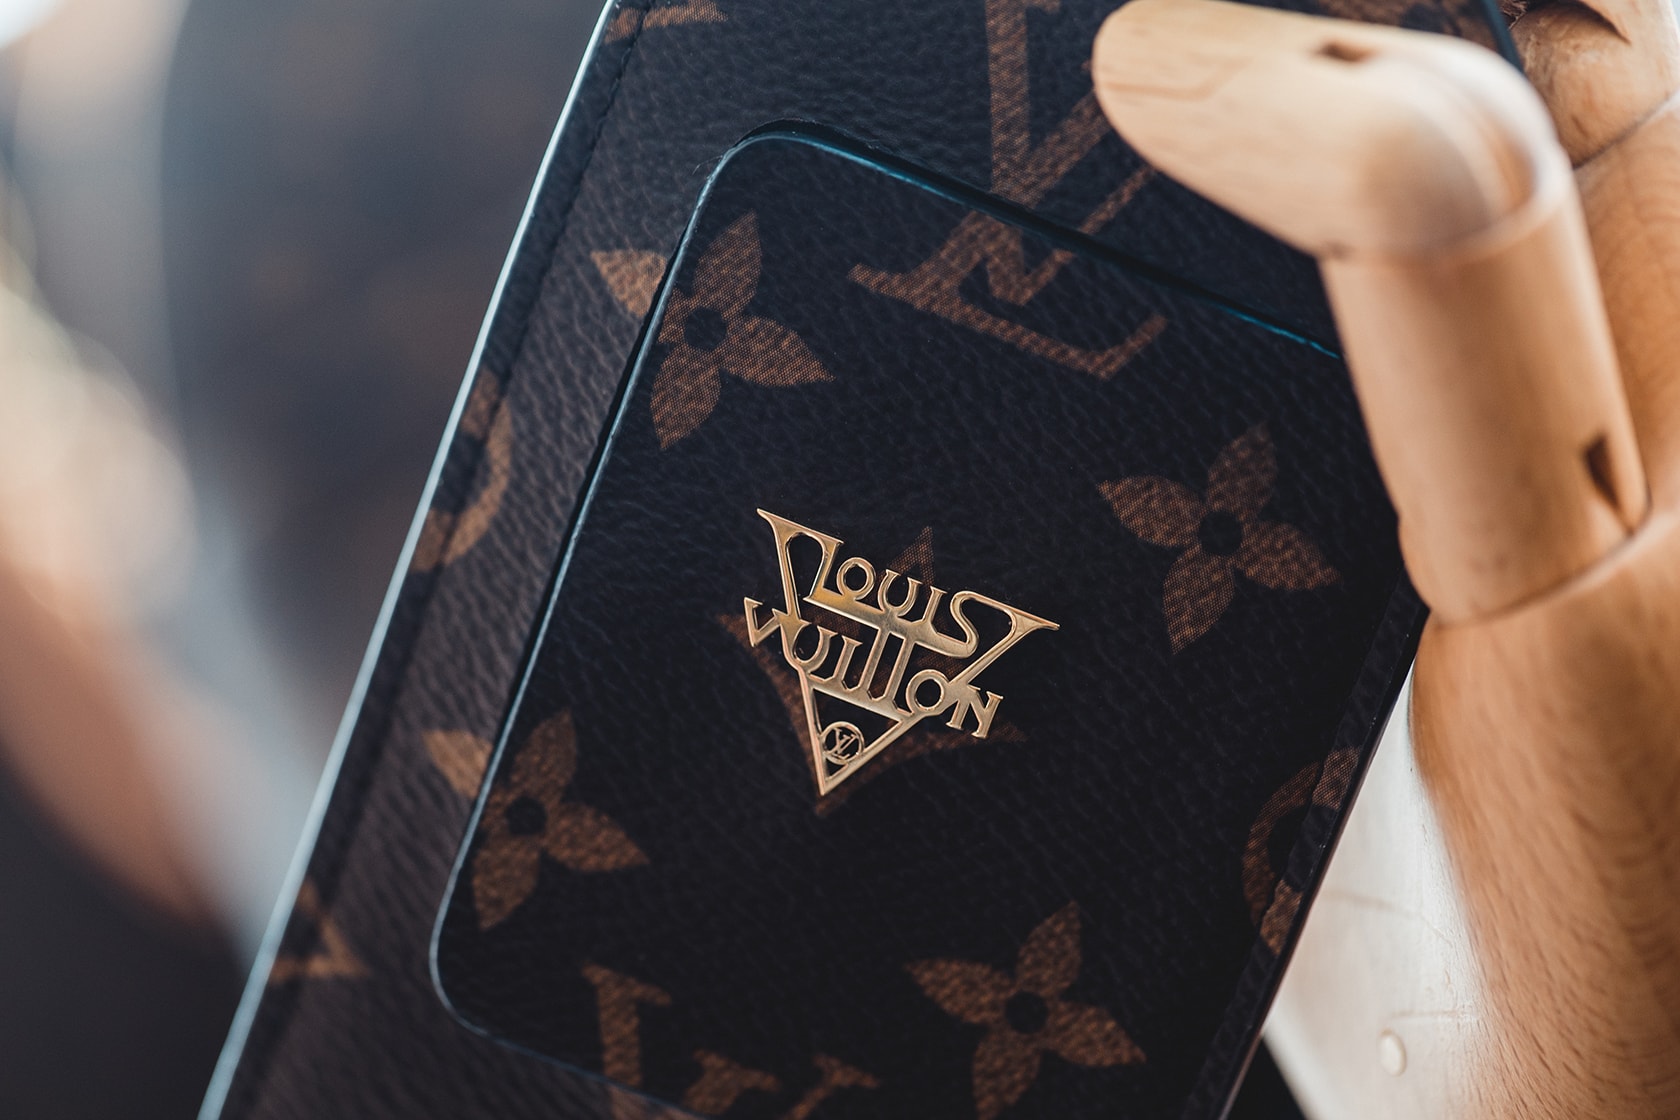 louis vuitton cruise 2020 collection closer look preview monogram gold logo bags clutch phone case egg scarf scarves accessories